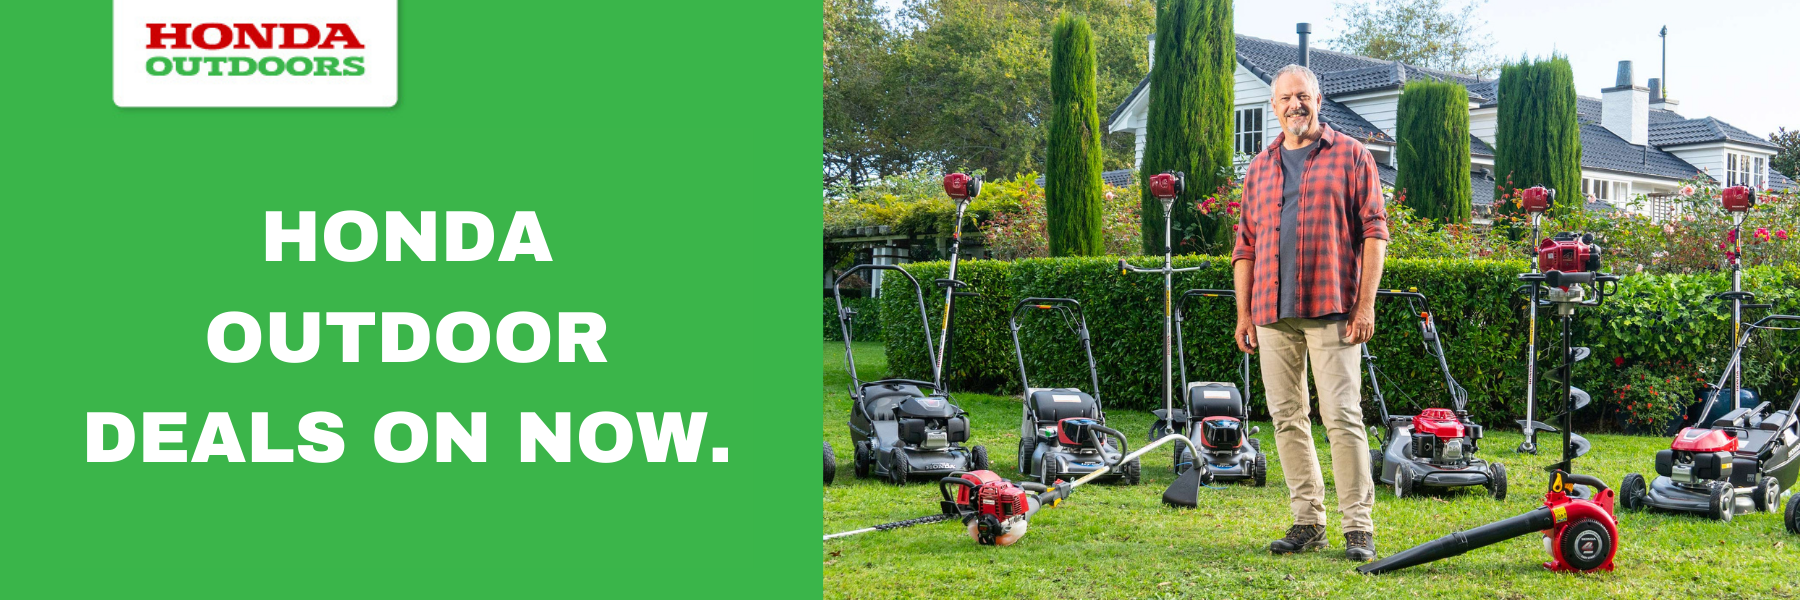 Gardener in his yard with his Honda Lawnmower, Leaf Blower,Edge Trimmer and Post Hole Digger